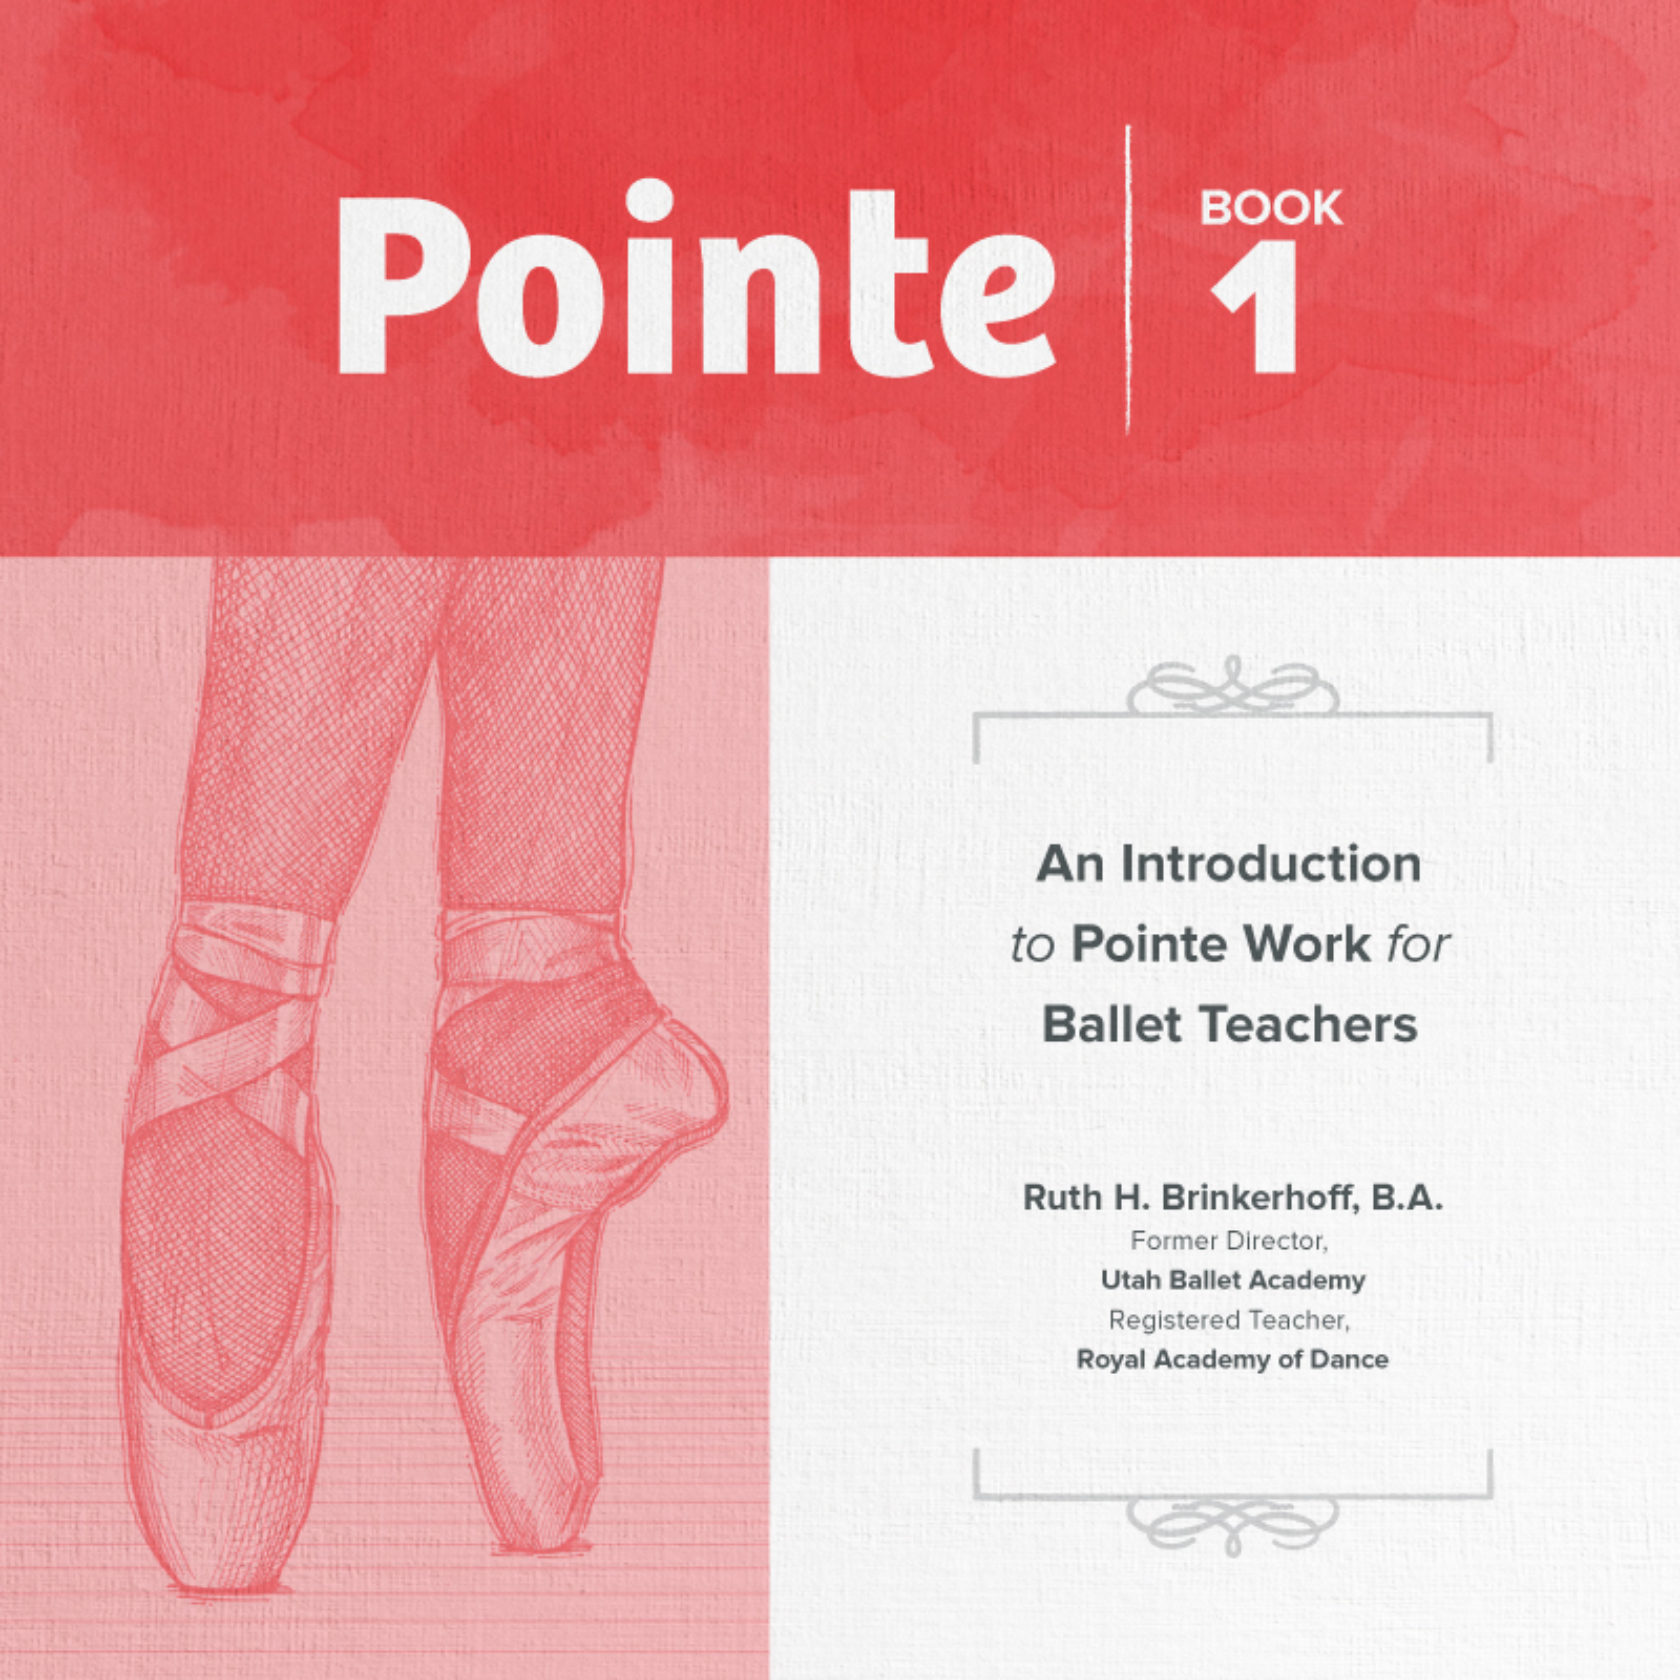 Pointe 1: An Introduction to Pointe Work